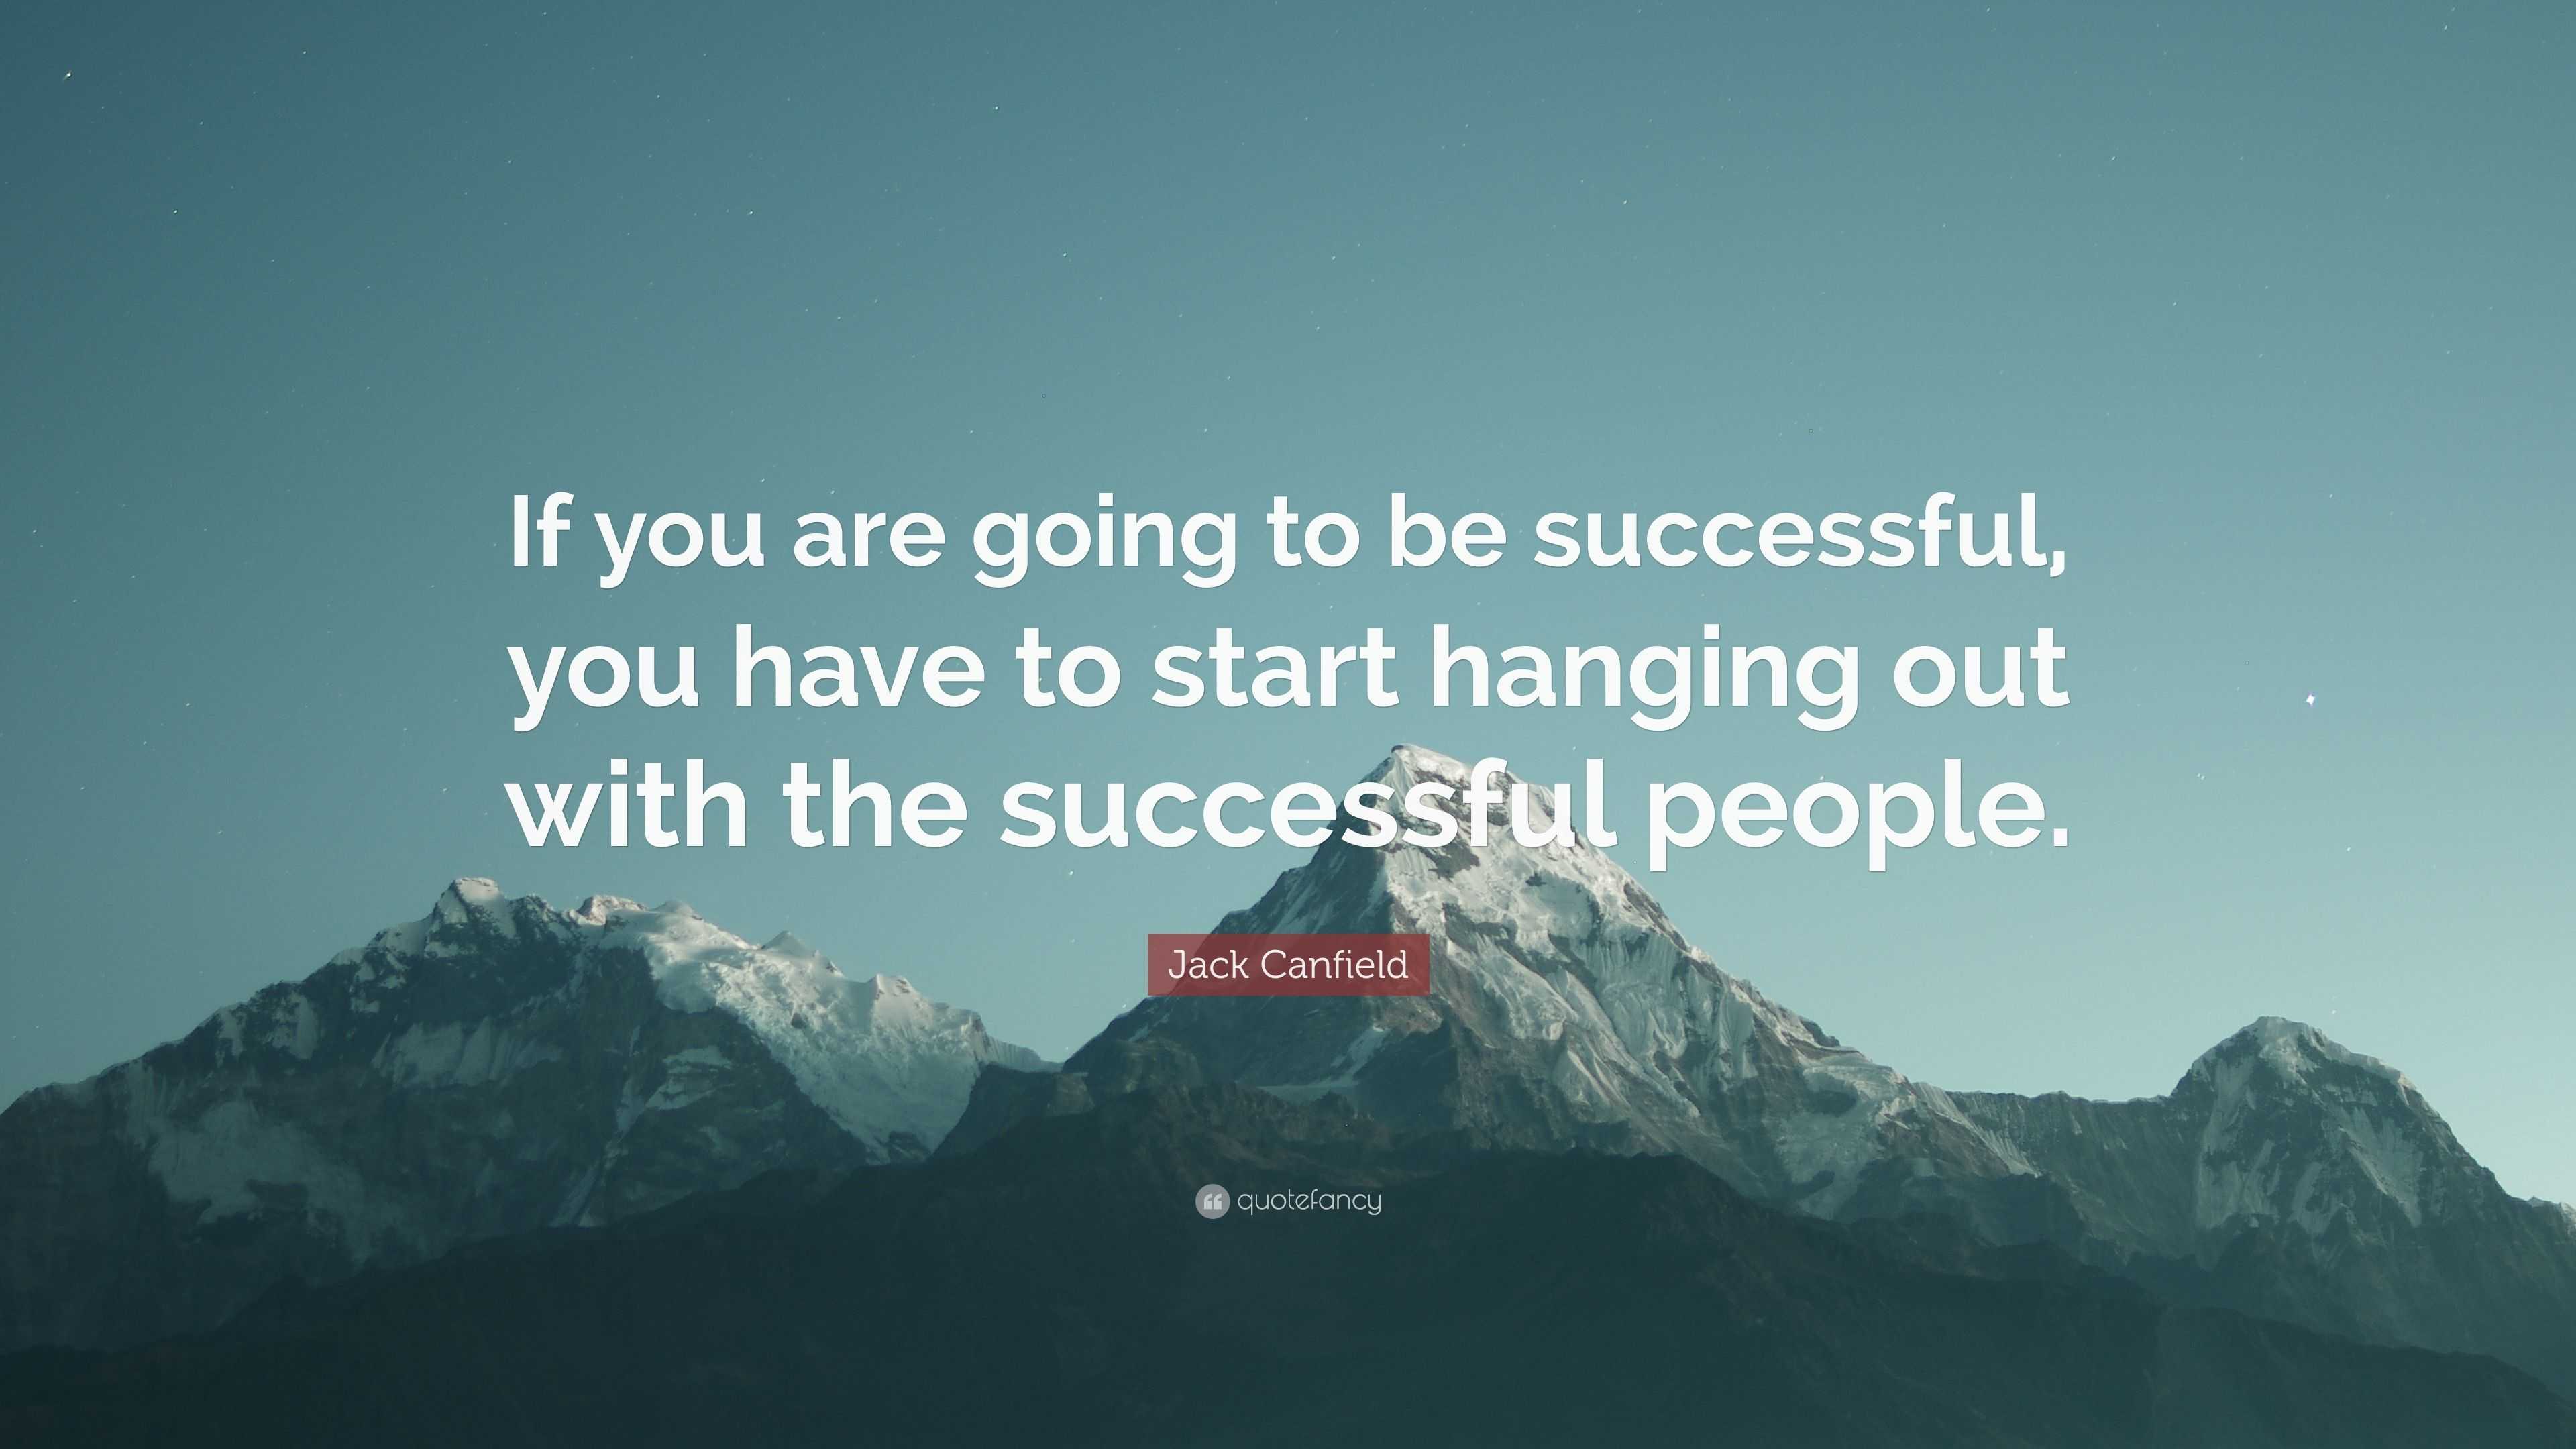 Jack Canfield Quote: “If you are going to be successful, you have to ...